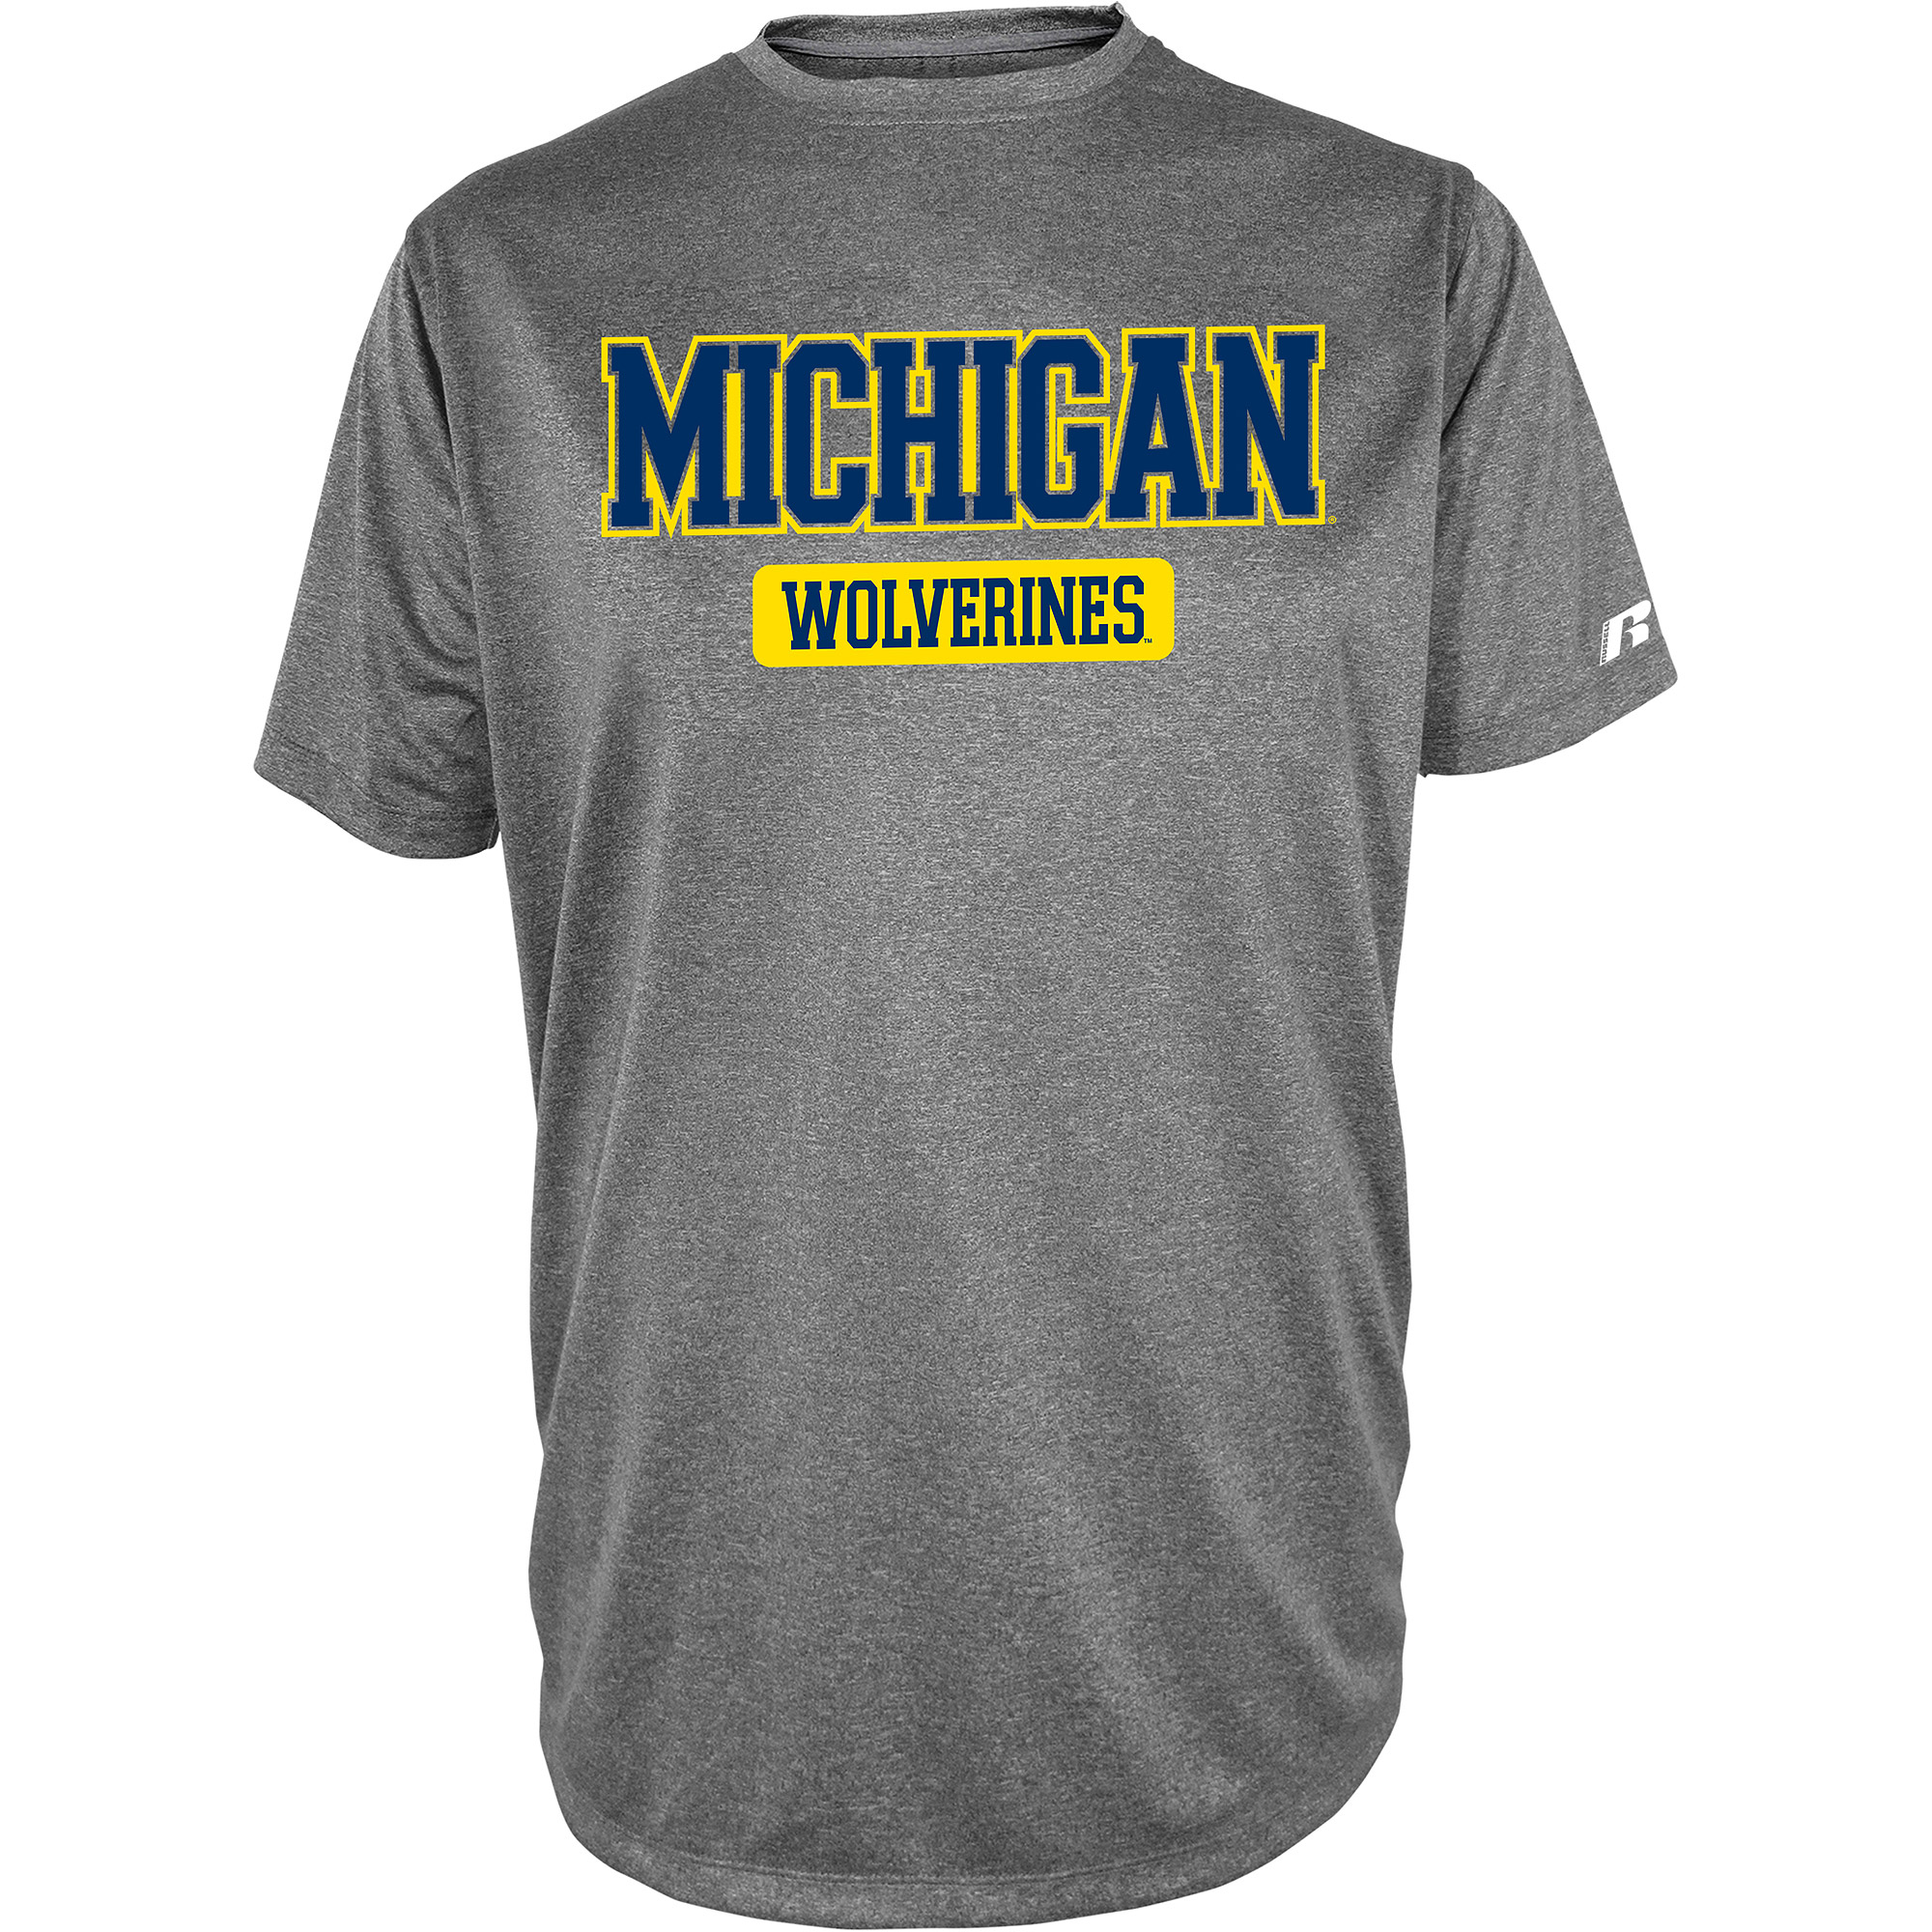 Russell NCAA  Michigan Wolverines, Men's Impact T-Shirt - image 1 of 1